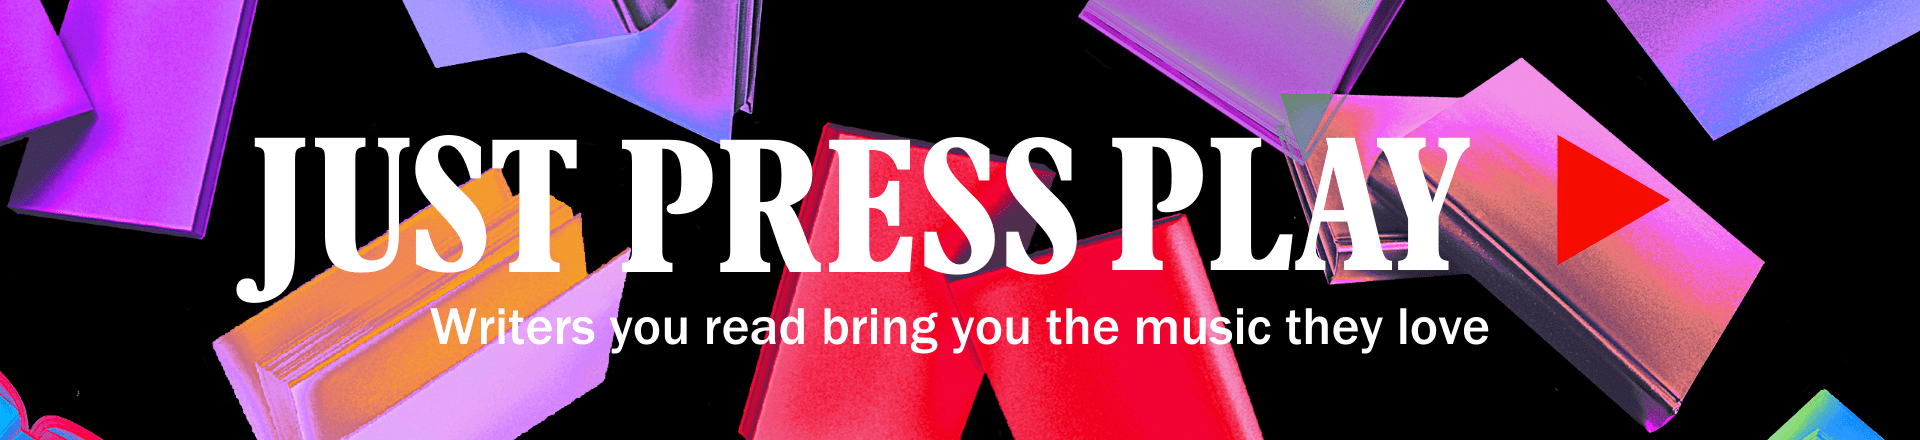 Just Press Play: Writers you read bring you the music they love